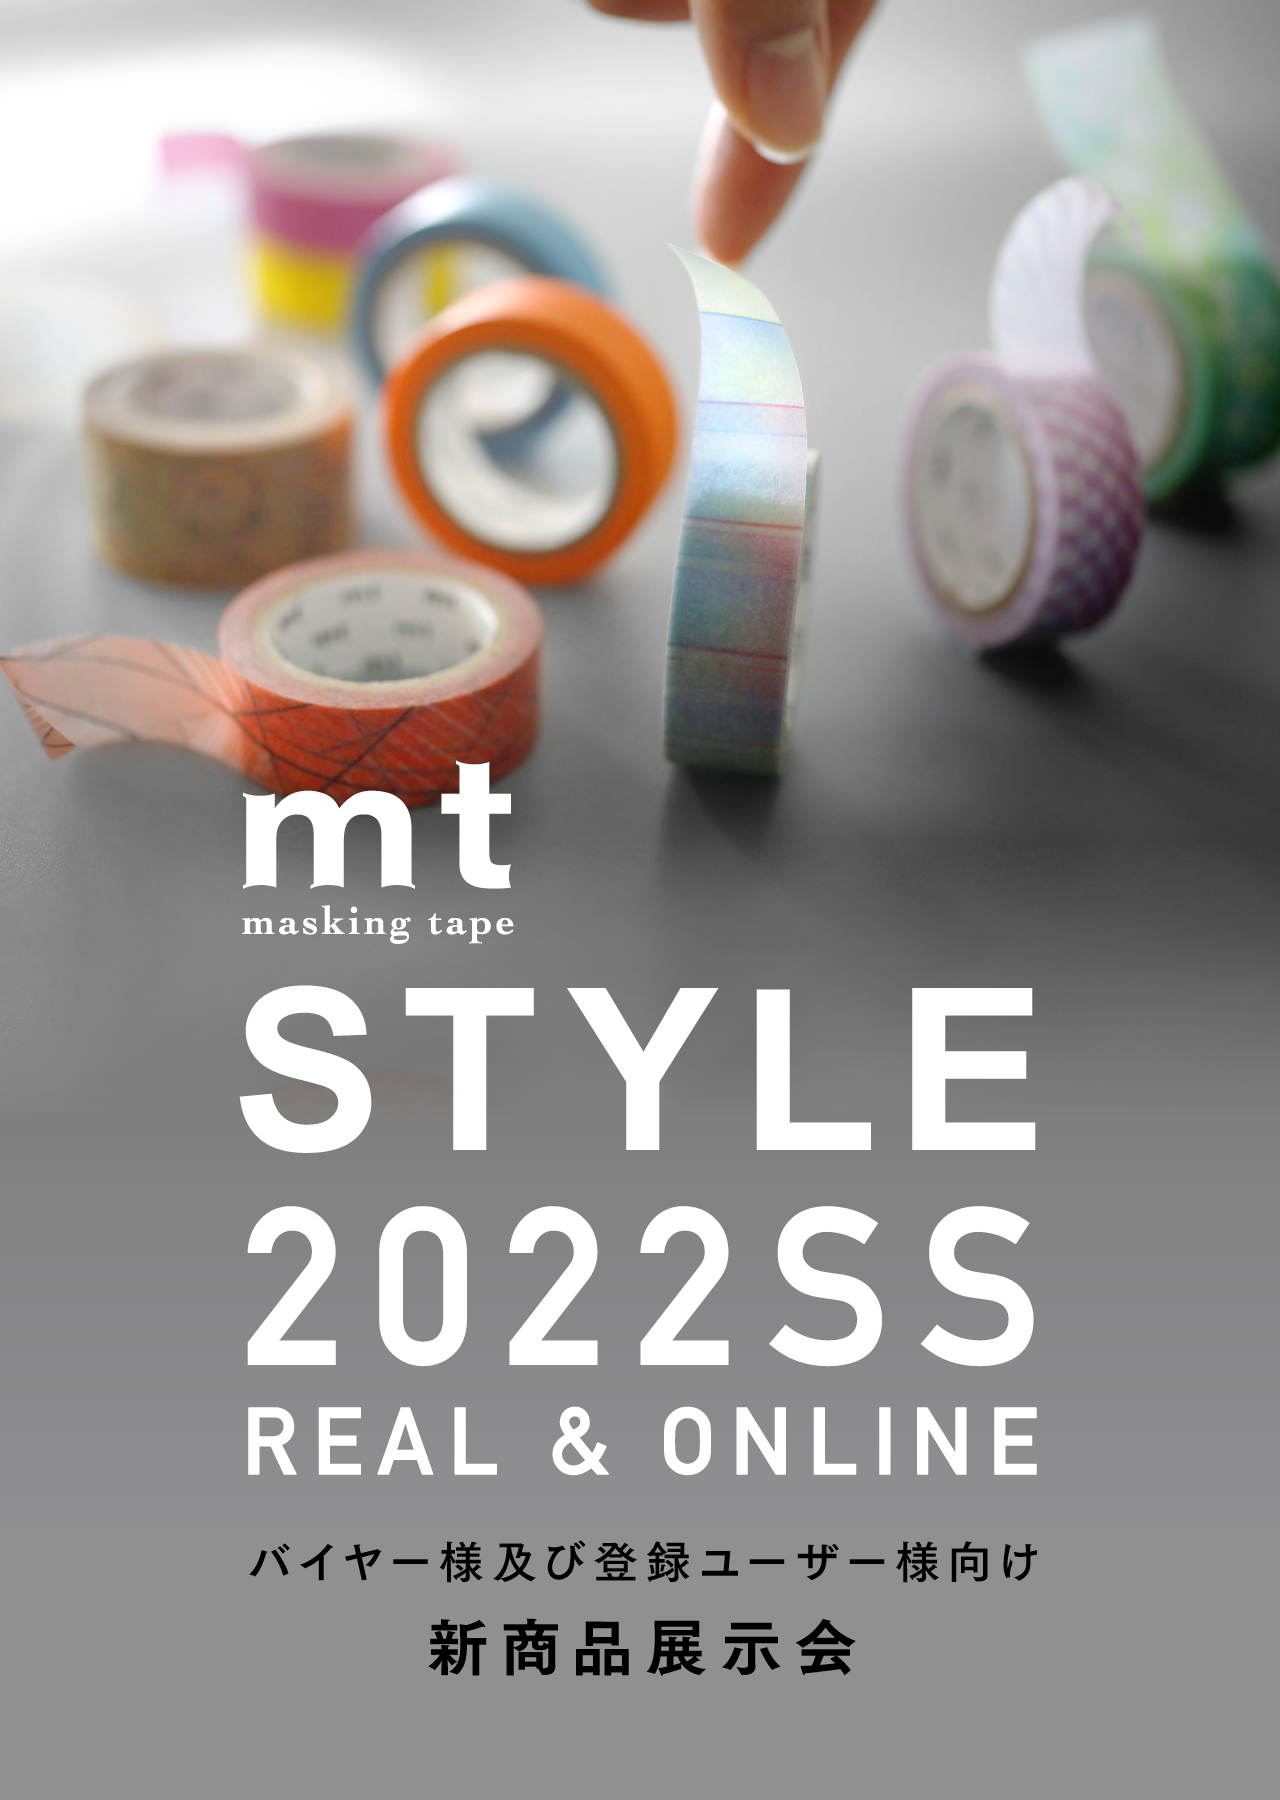 mt STYLE 2022SS REAL＆ONLINE